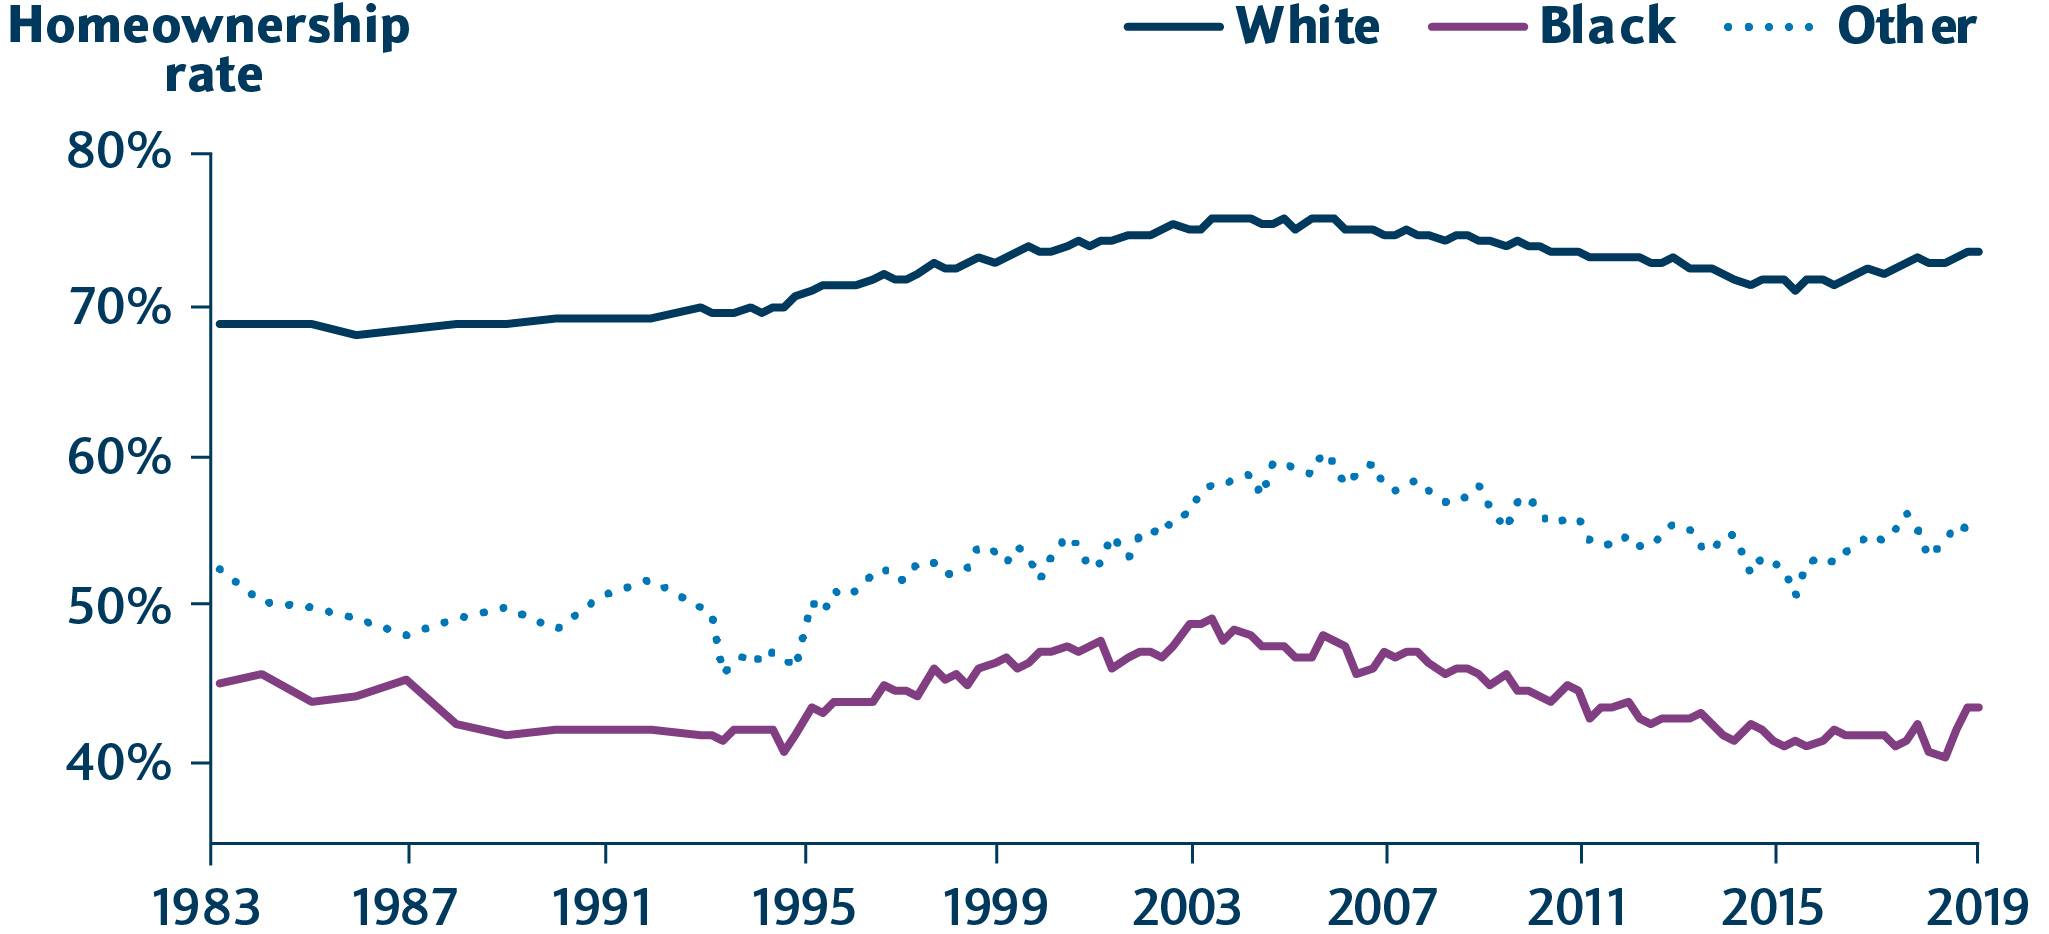 Line graph showing homeownership rates of whites, Blacks and other races between 1983-2019 